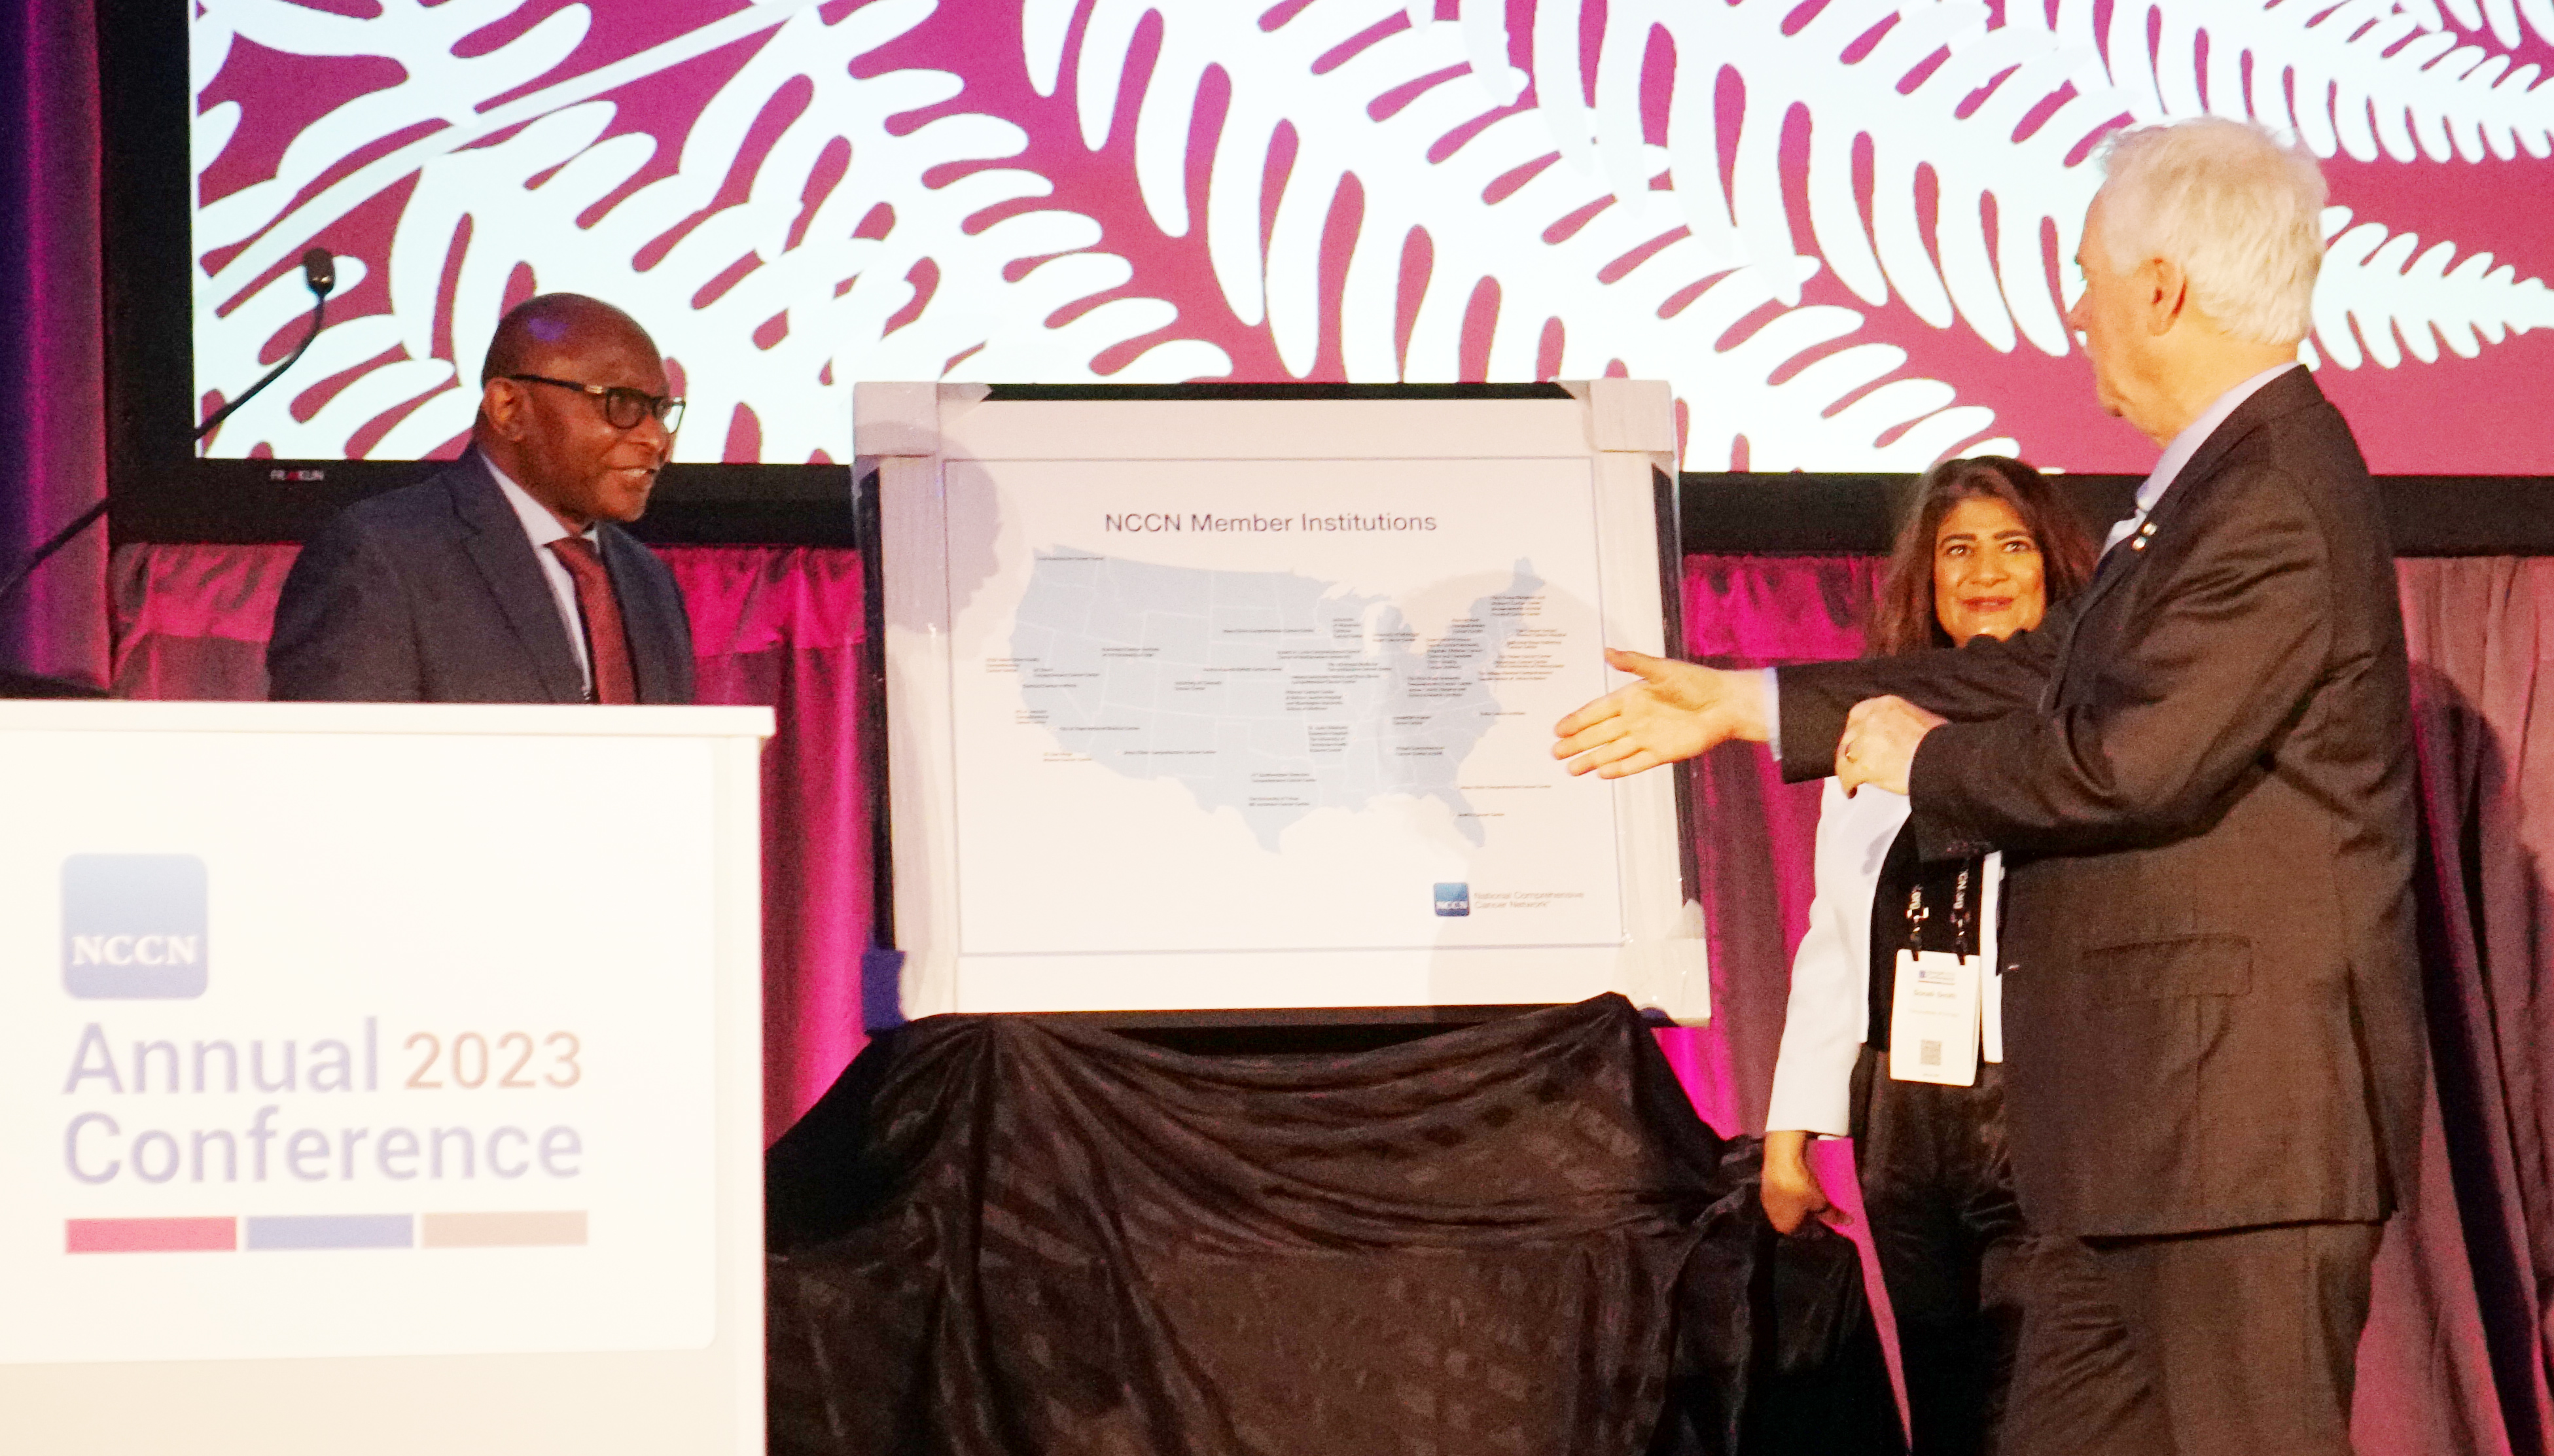 Kunle Odunsi, MD, PhD, Director of the UChicago Medicine Comprehensive Cancer Center; Sonali M. Smith, MD, Chief, Section of Hematology/Oncology, UChicago Medicine; and Robert W. Carlson, MD, Chief Executive Officer, NCCN.